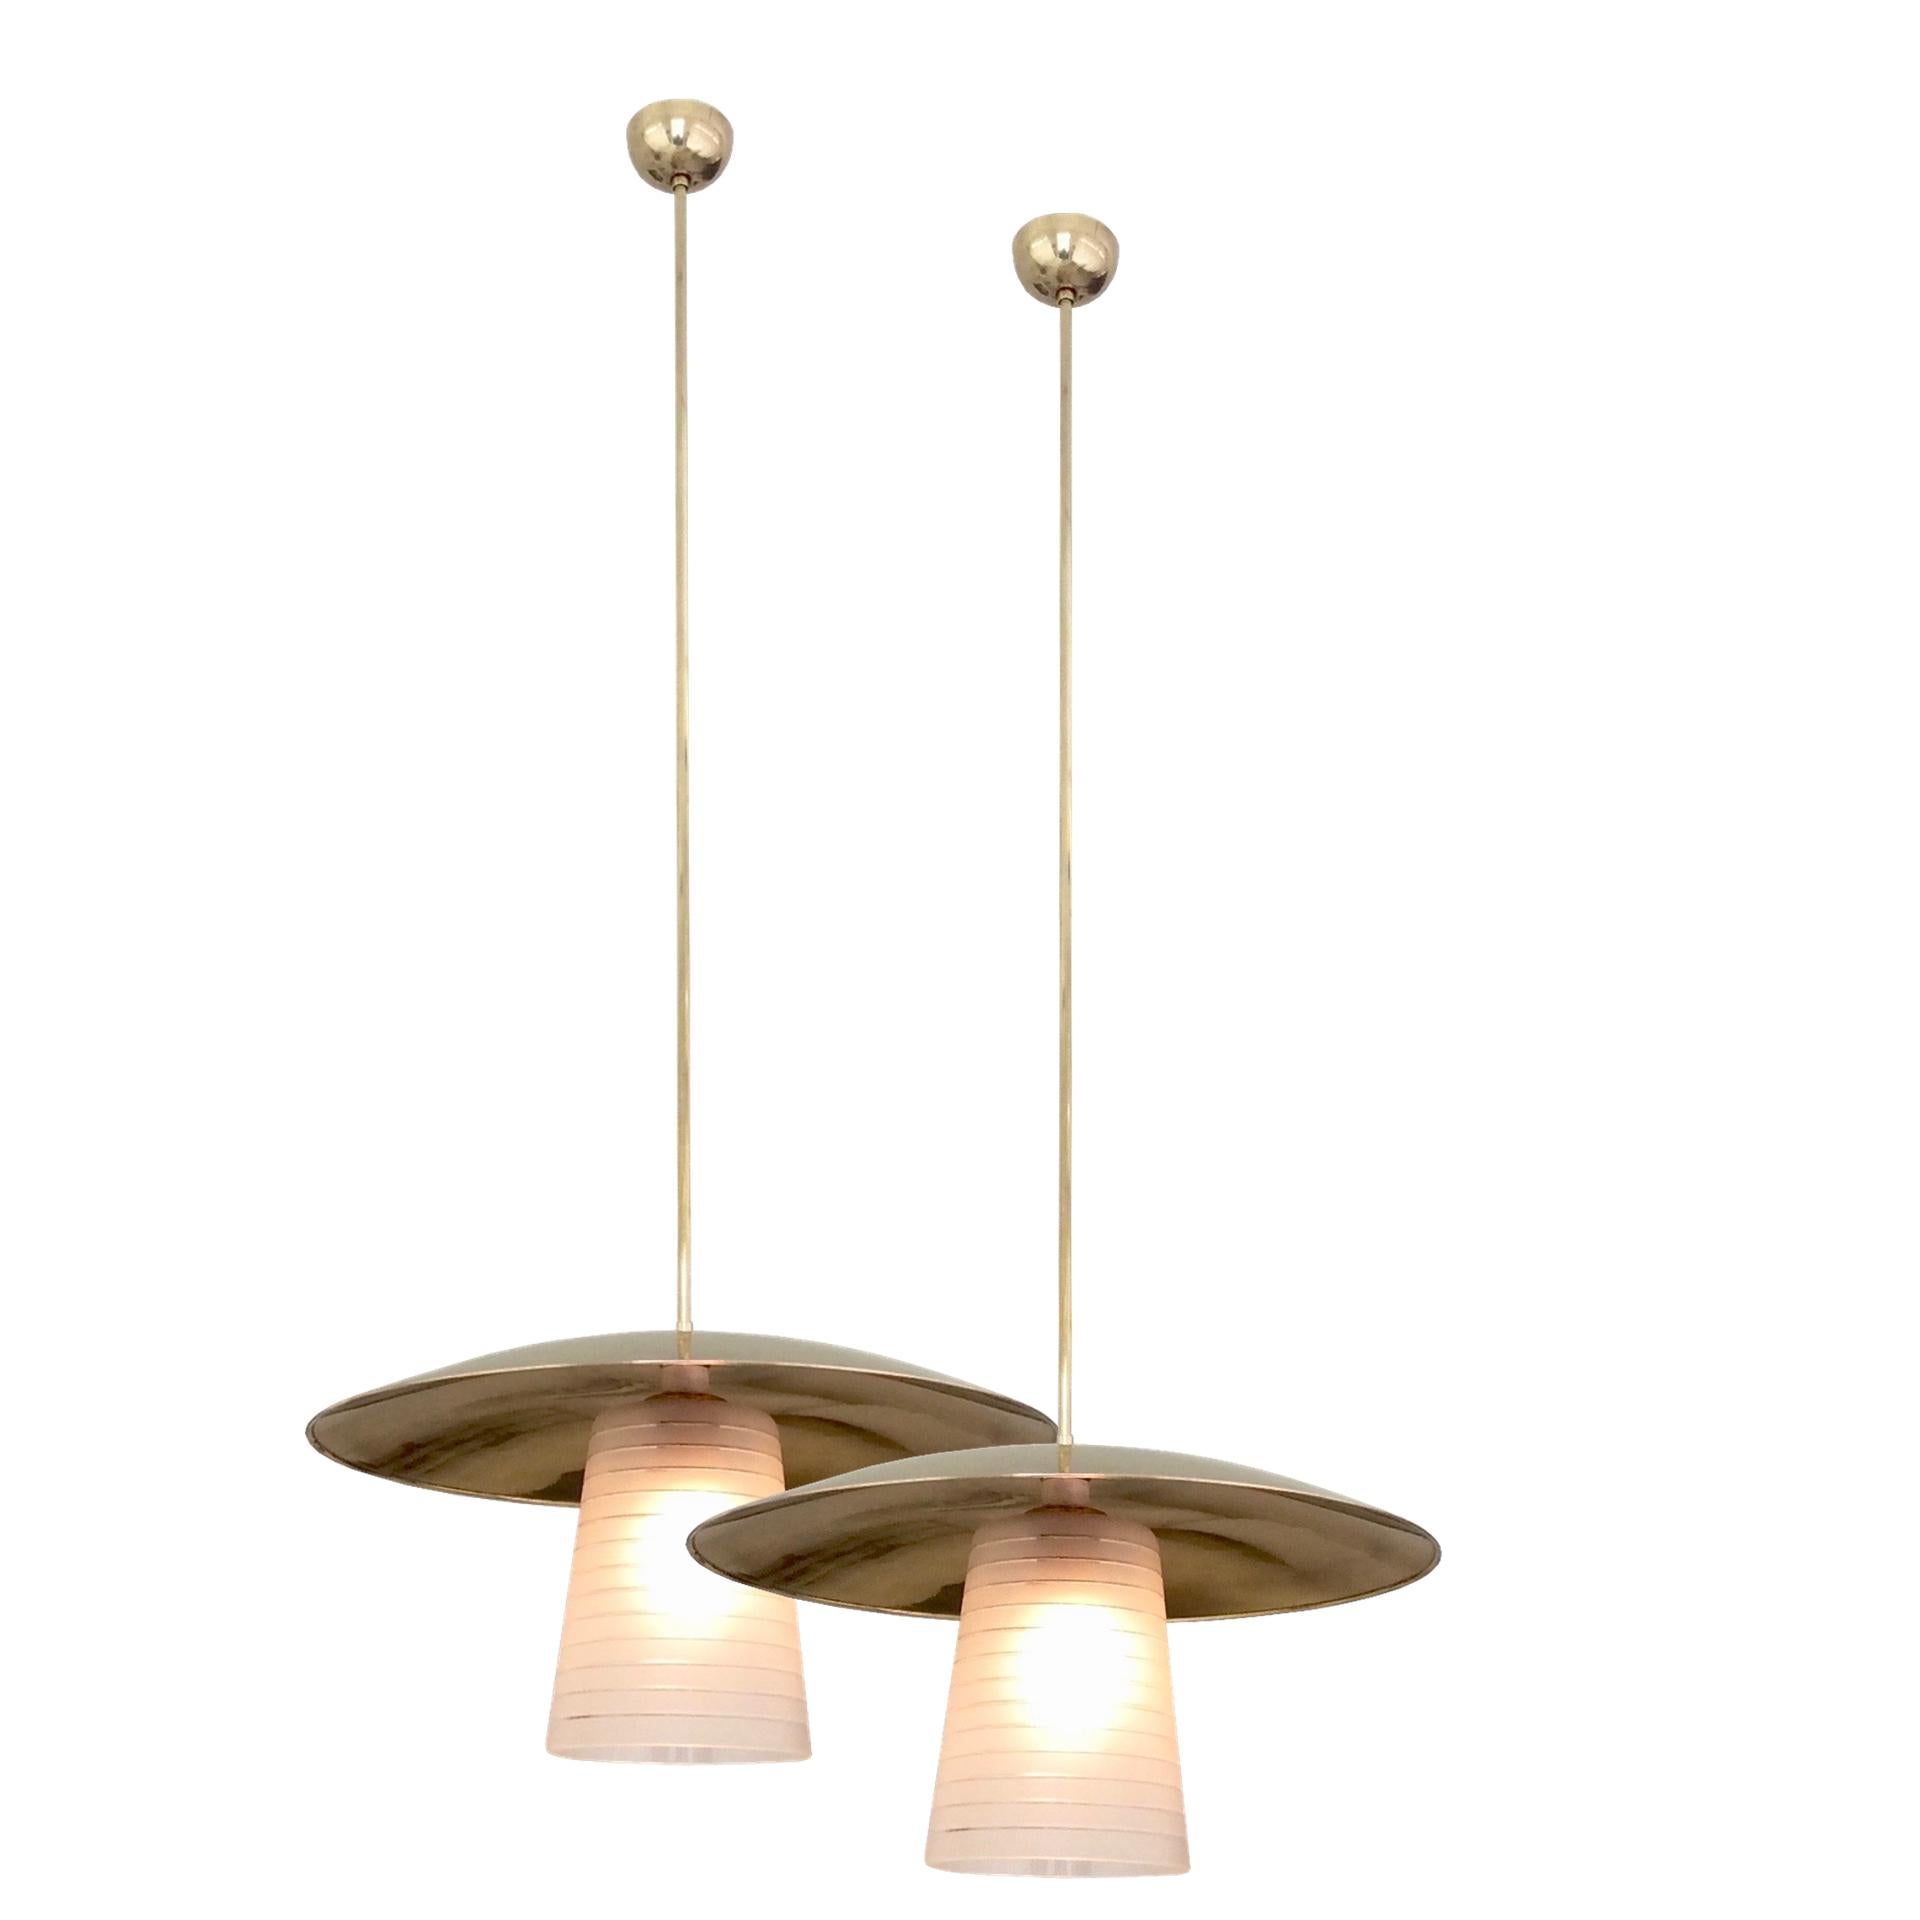 Pair of hanging lamps, circa 1950, Italy.
Polished brass and lined frosted glass.
One E 27 bulb of 40 W.
Dimensions: 135 cm height, diameter: 50 cm.
Good original condition.
All purchases are covered by our Buyer Protection Guarantee.
This item can